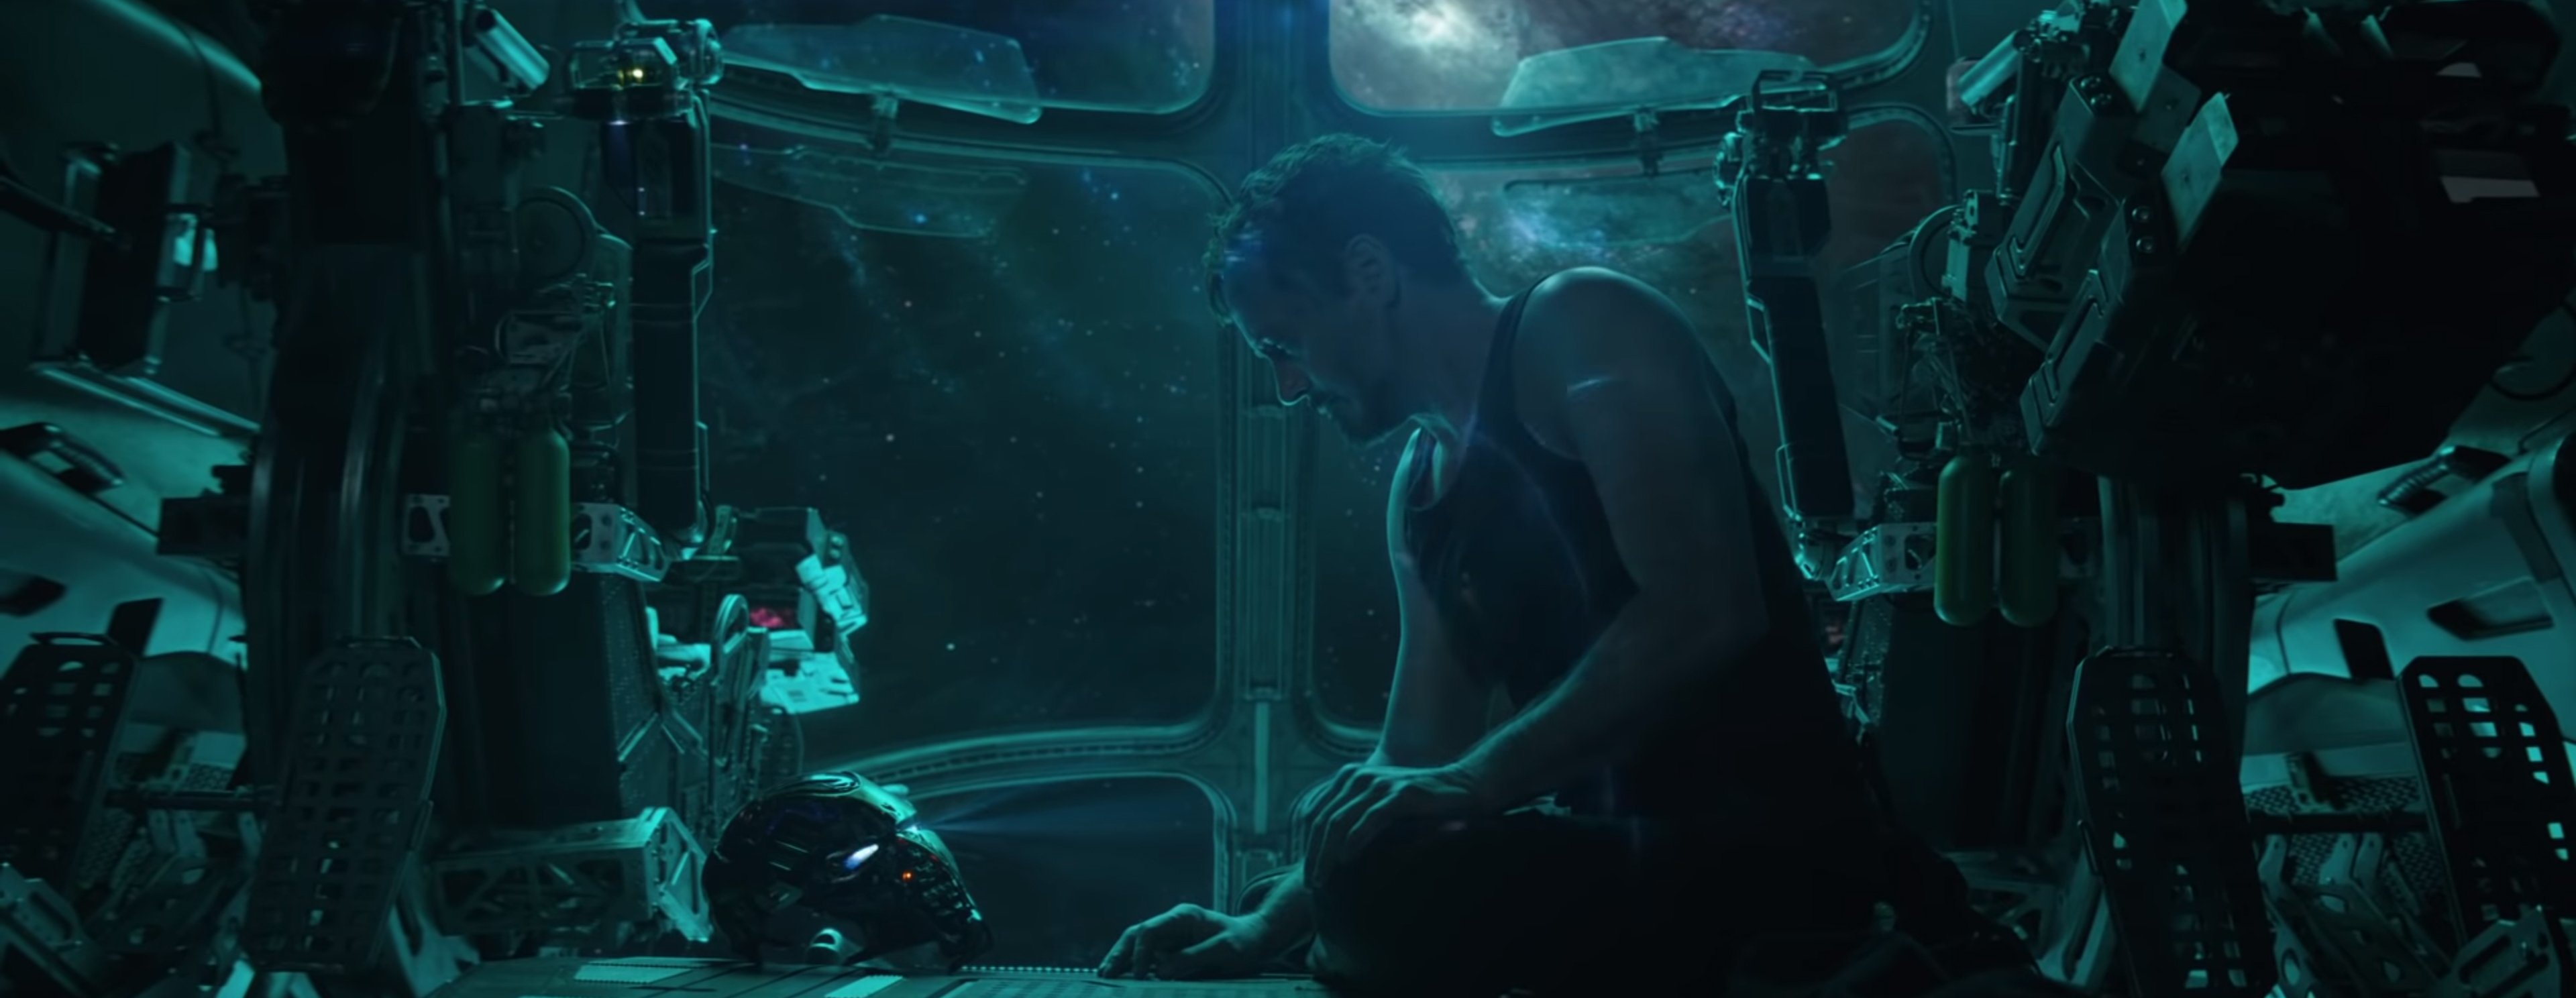 Avengers: Endgame Moments Ranked By Their Soul Crushing